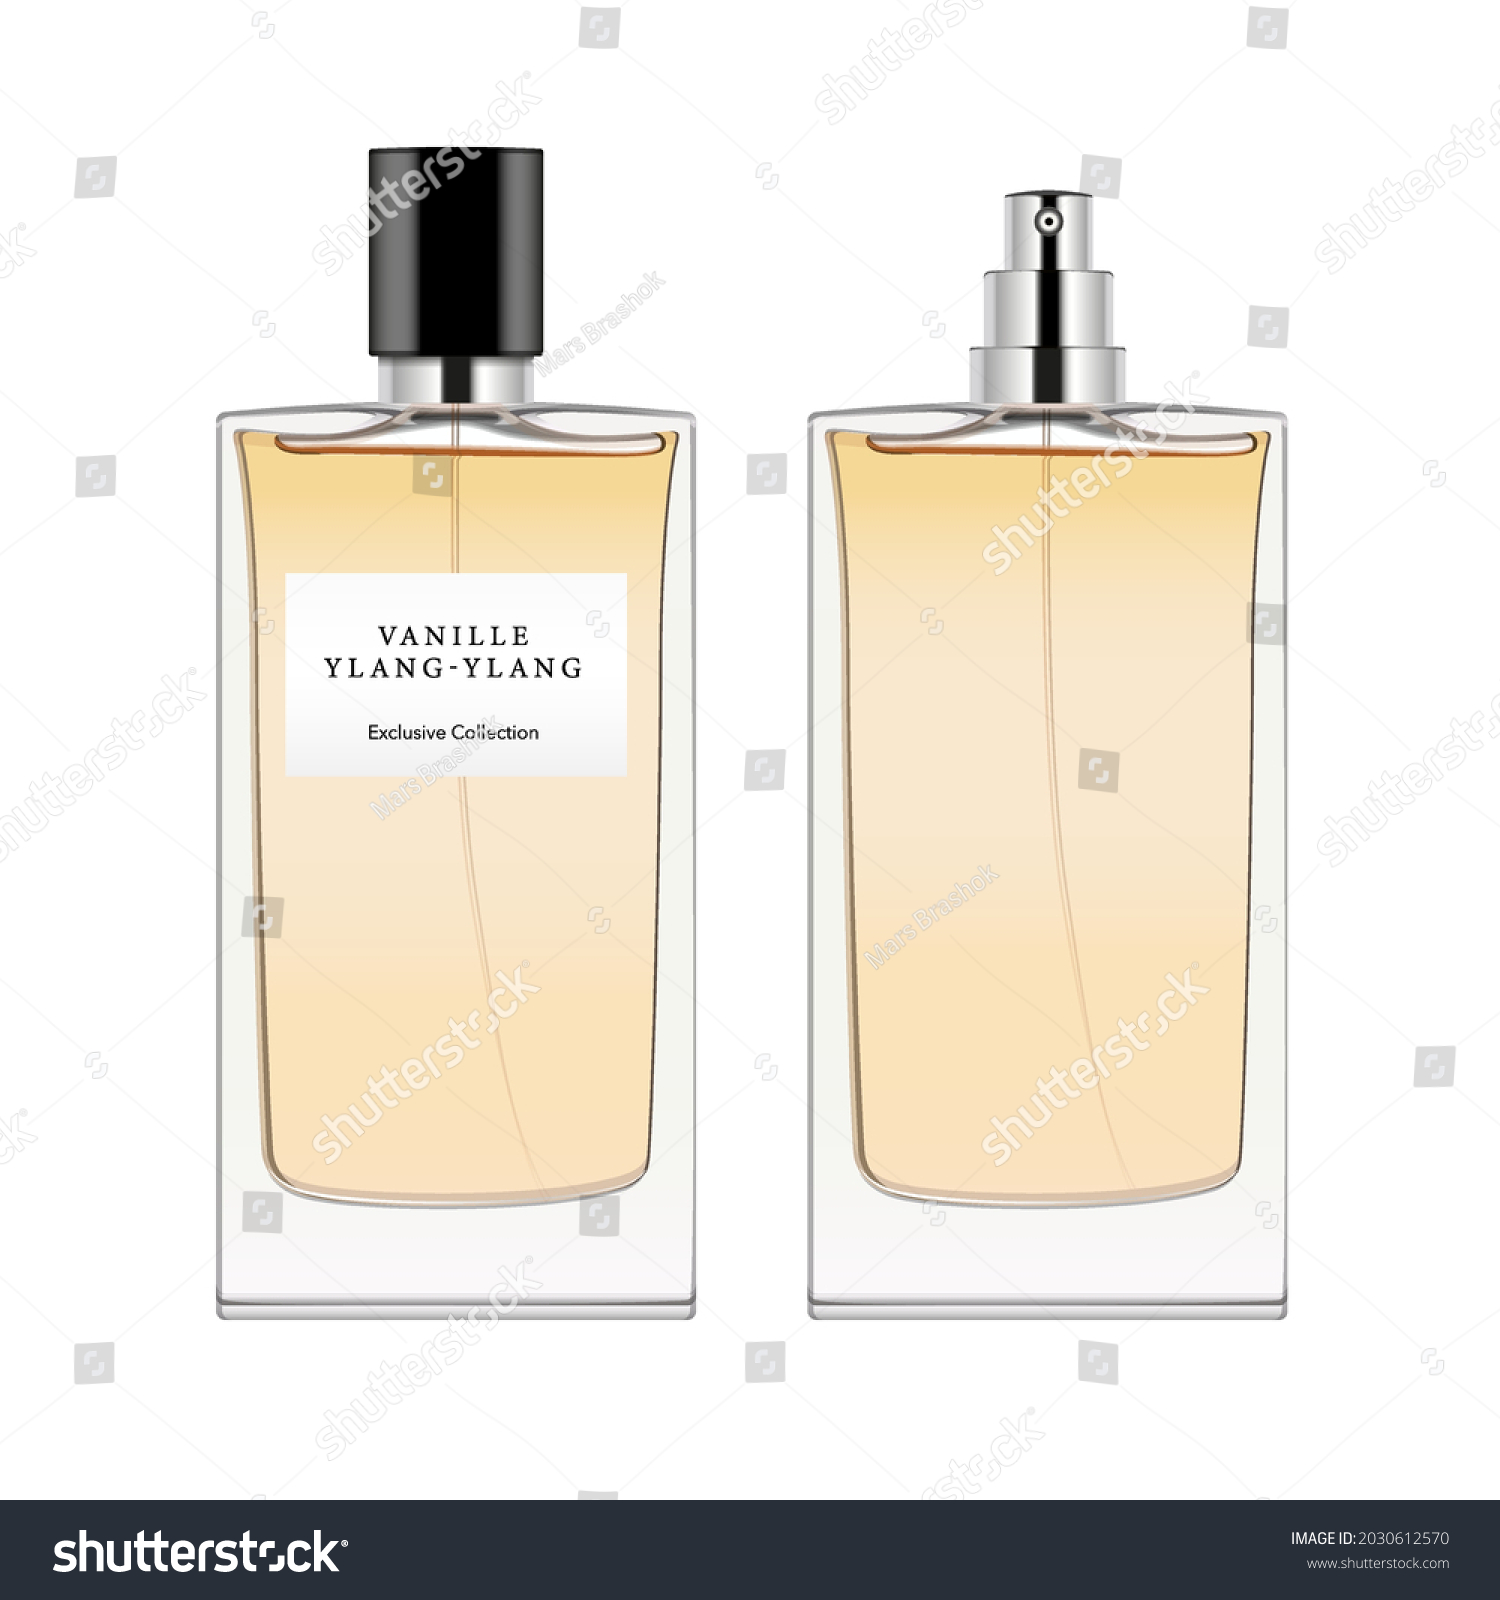 SVG of Perfume glass bottle template. Realistic mockup of rectangle minimalist fragrance package with label, opened and closed. 3d vector illustration isolated on white background. svg